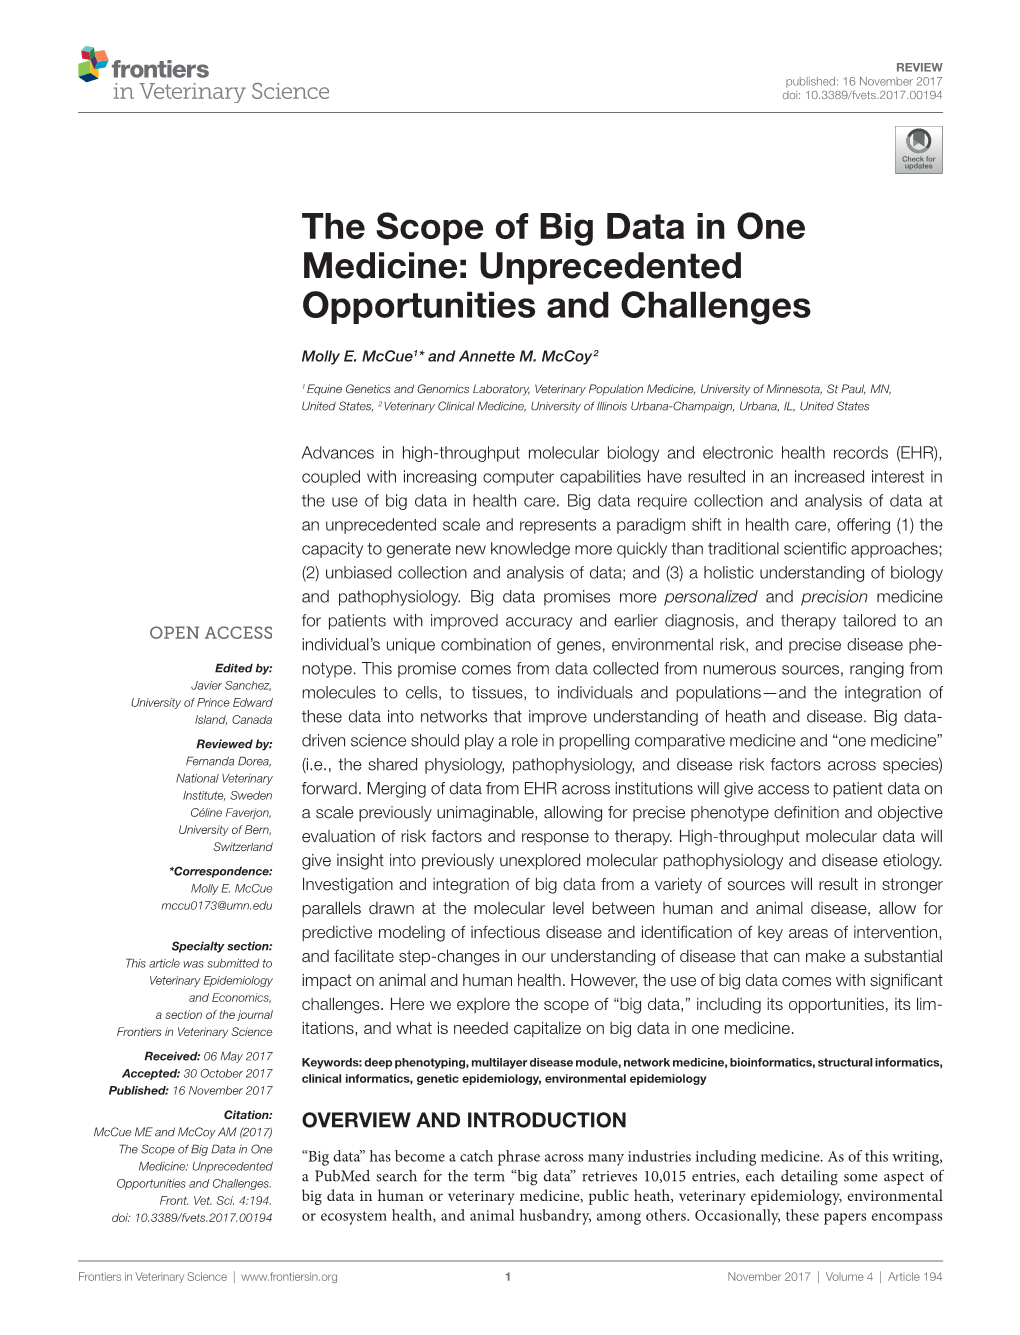 The Scope of Big Data in One Medicine: Unprecedented Opportunities and Challenges